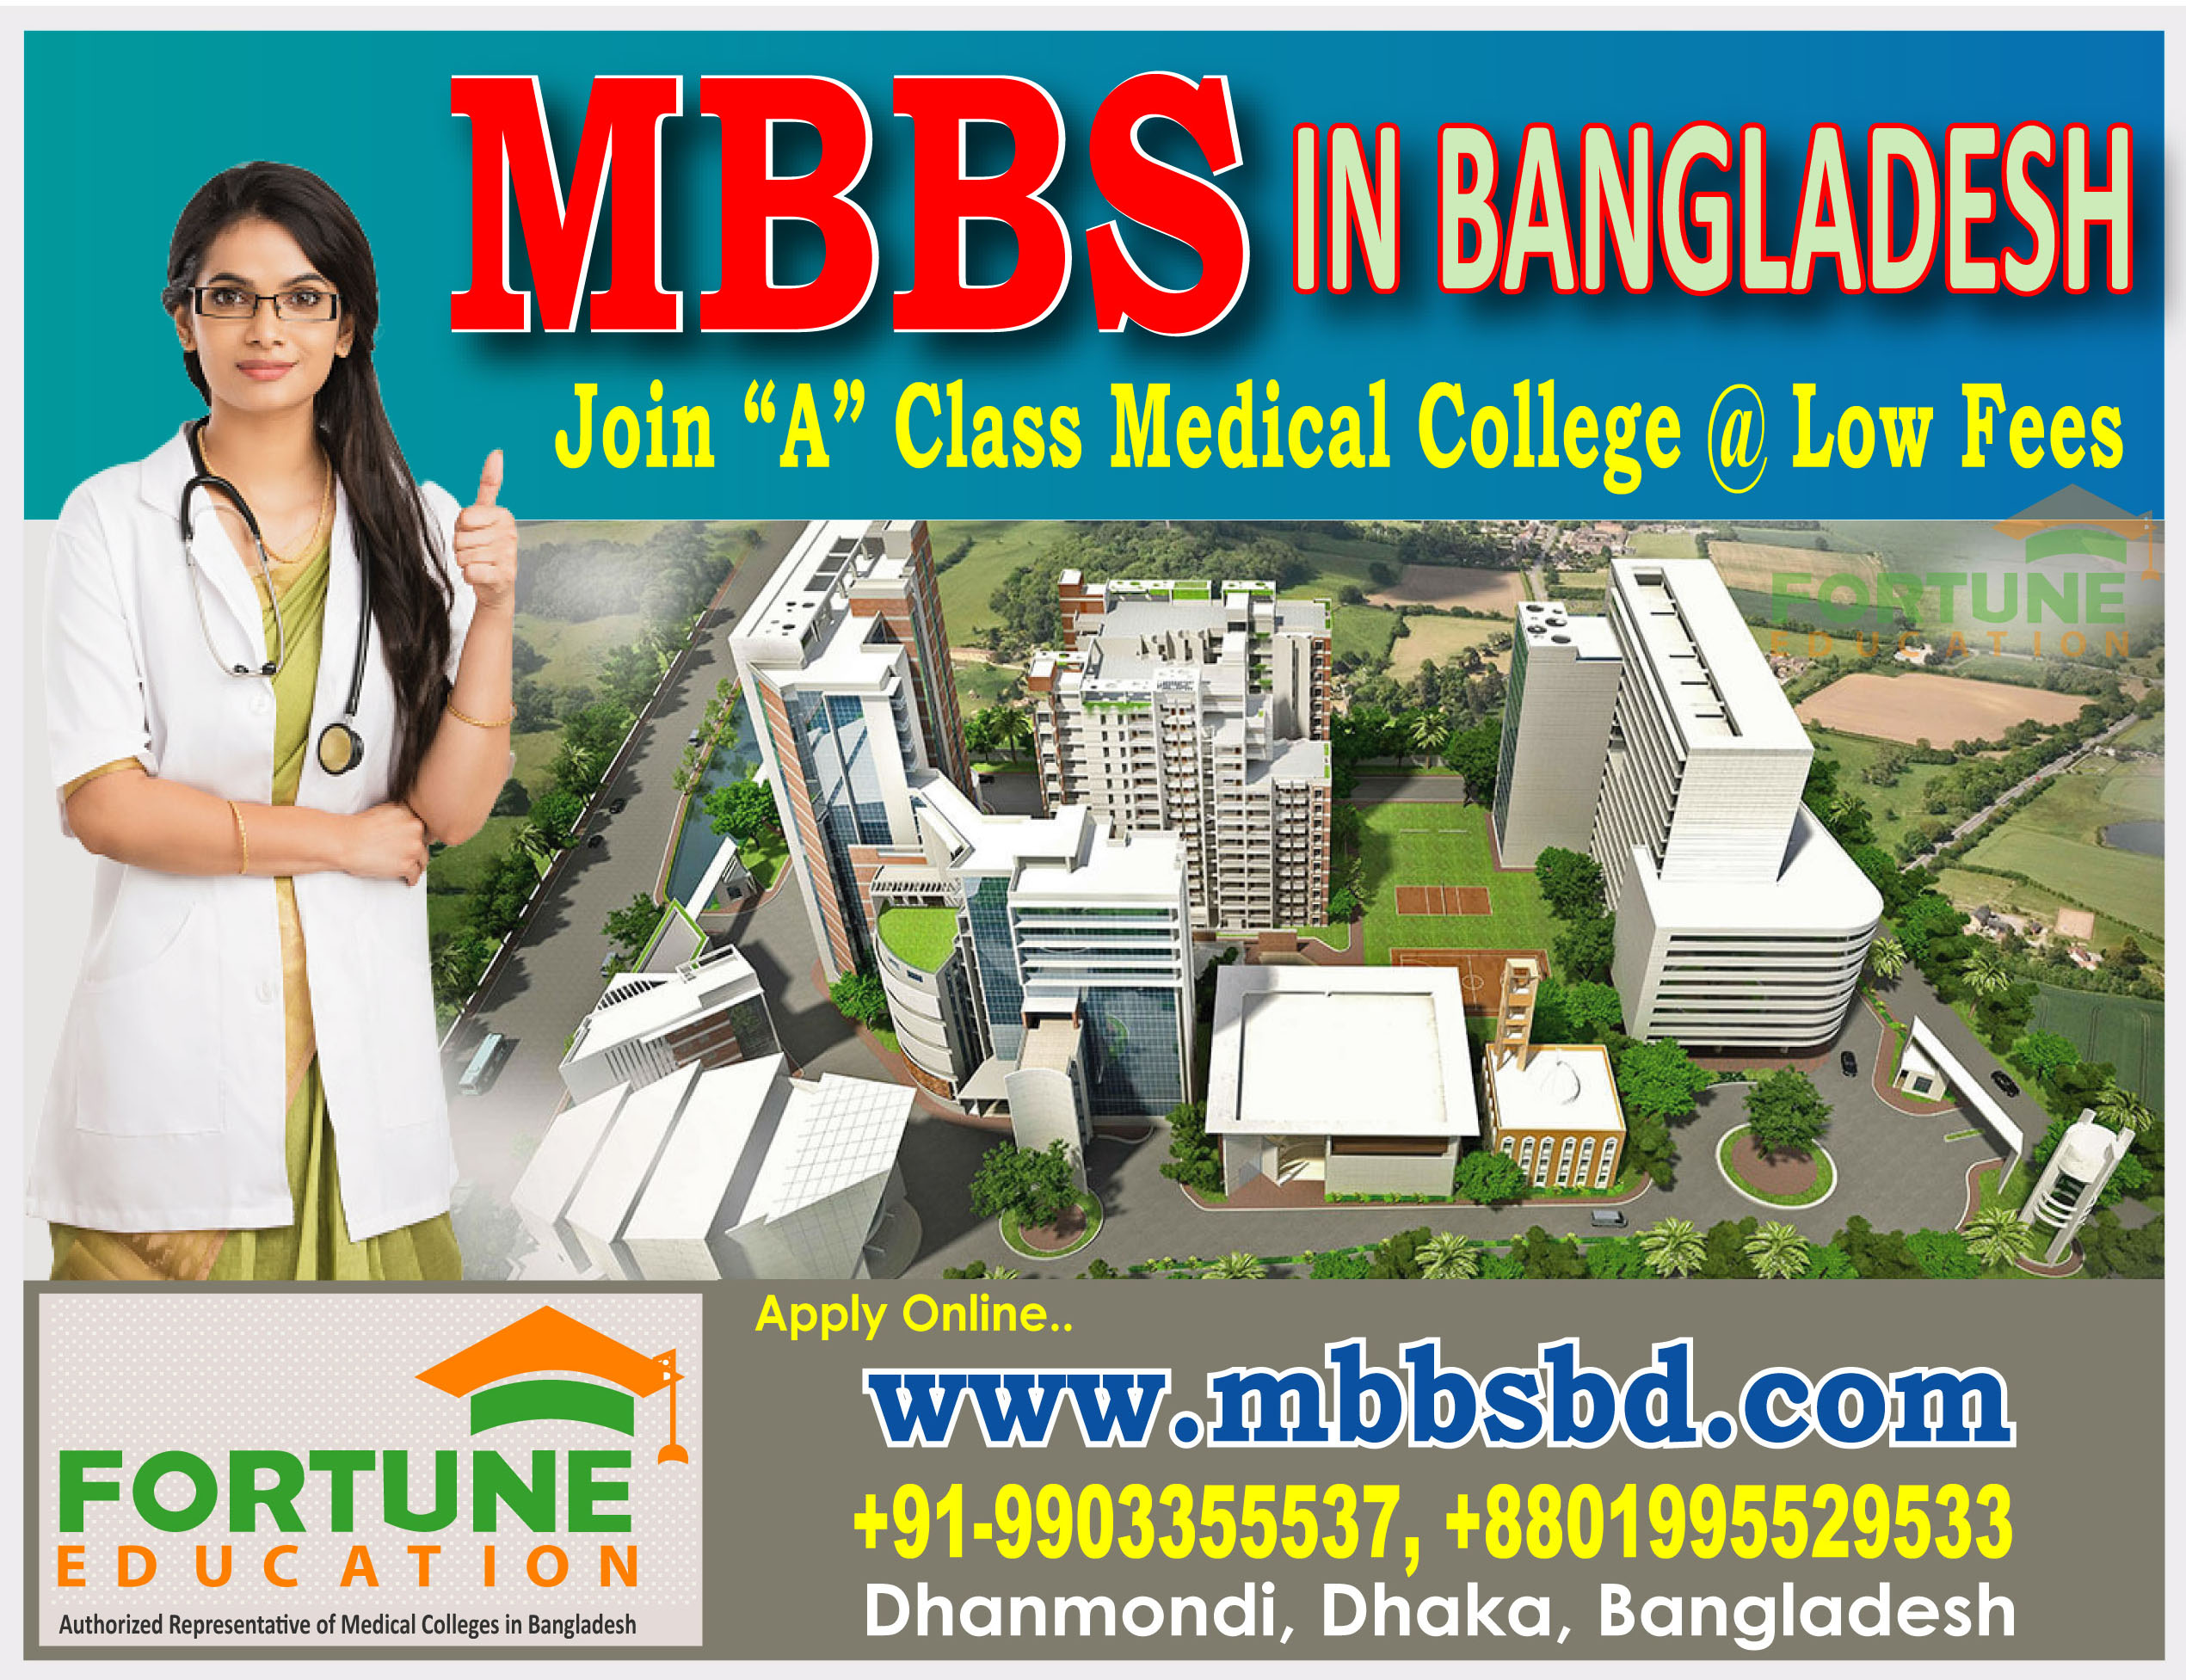 MBBS Admission in Best Medical Colleges Through Fortune Education